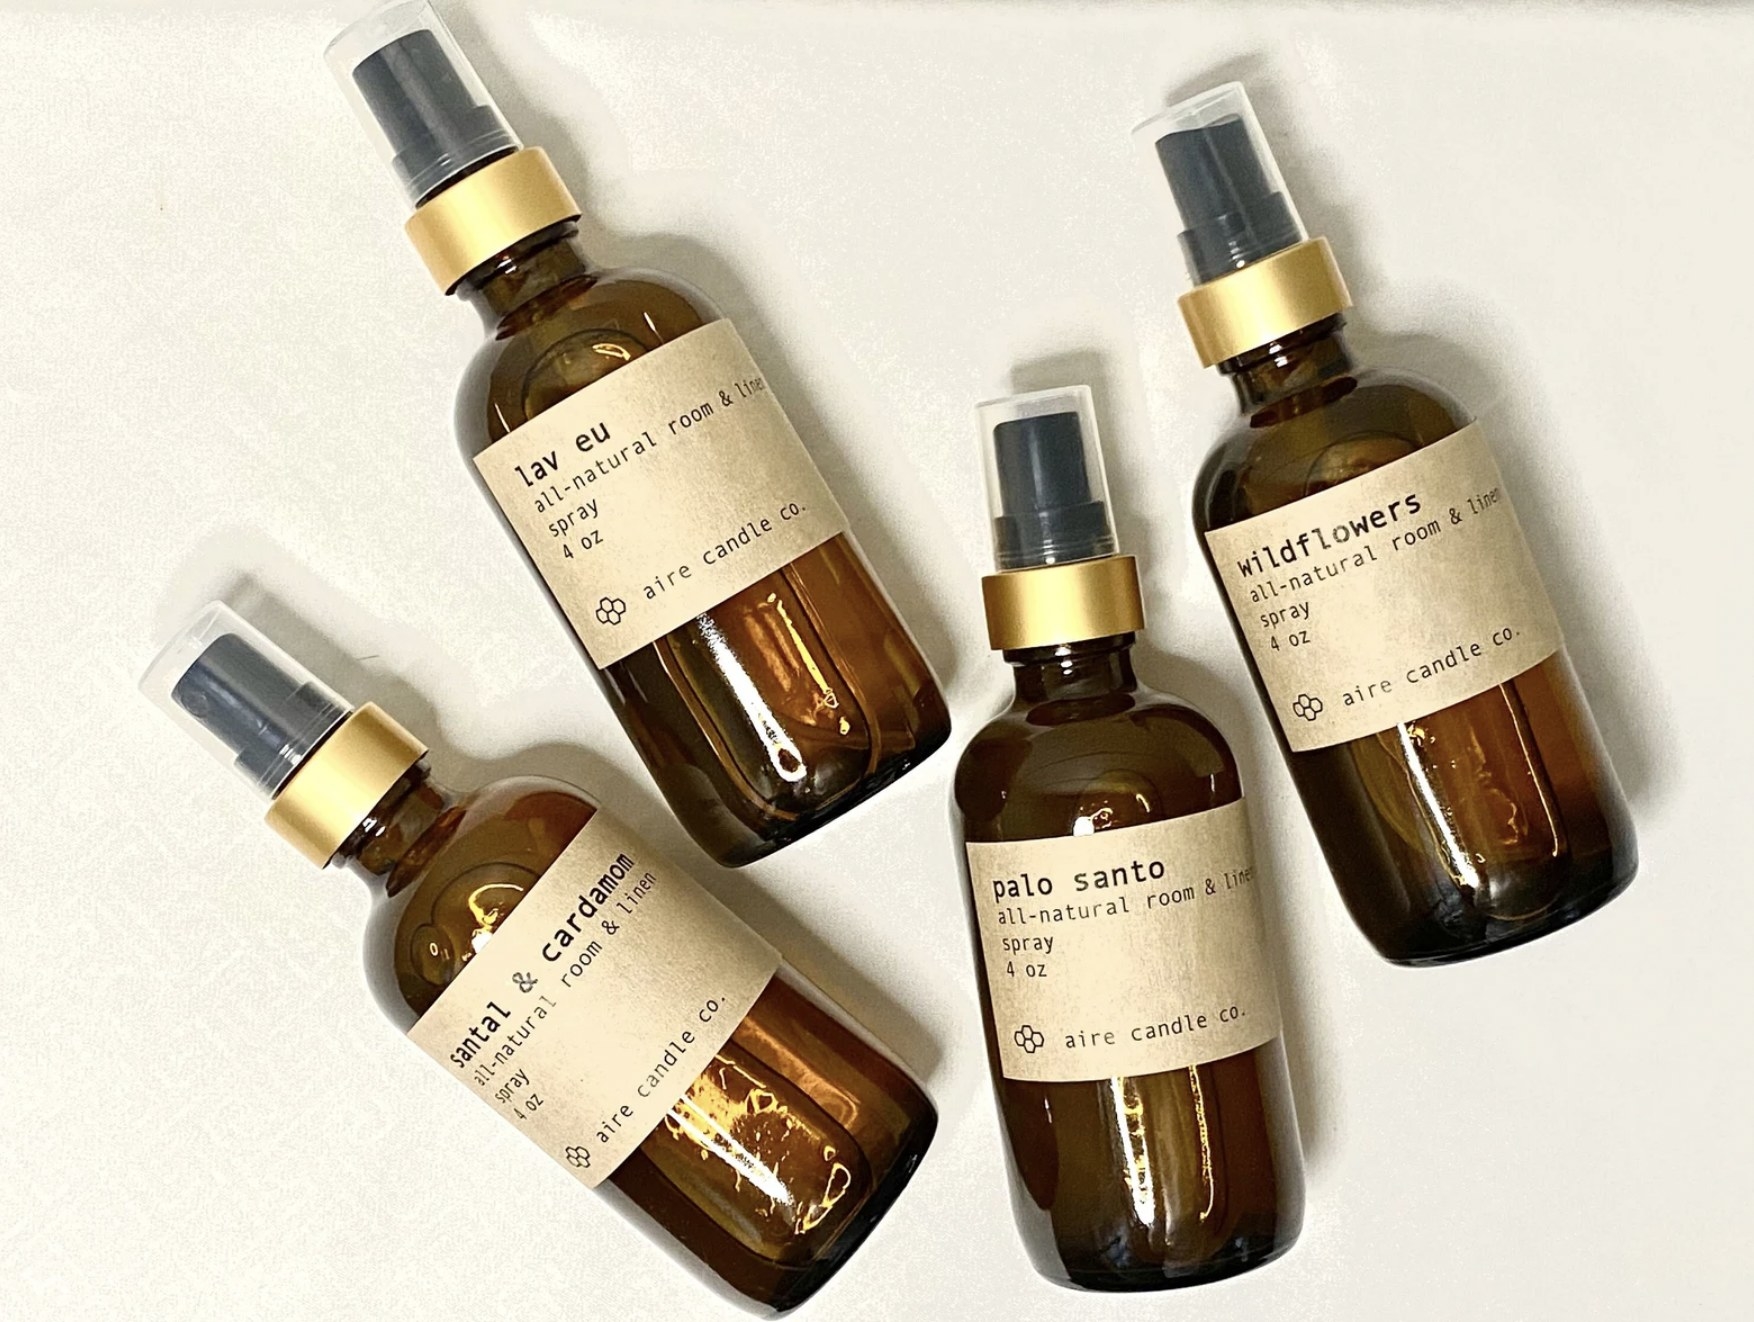 Four of the pillow mists in scents lave eu, palo santo, wildflowers, and santal &amp;amp; cardamon